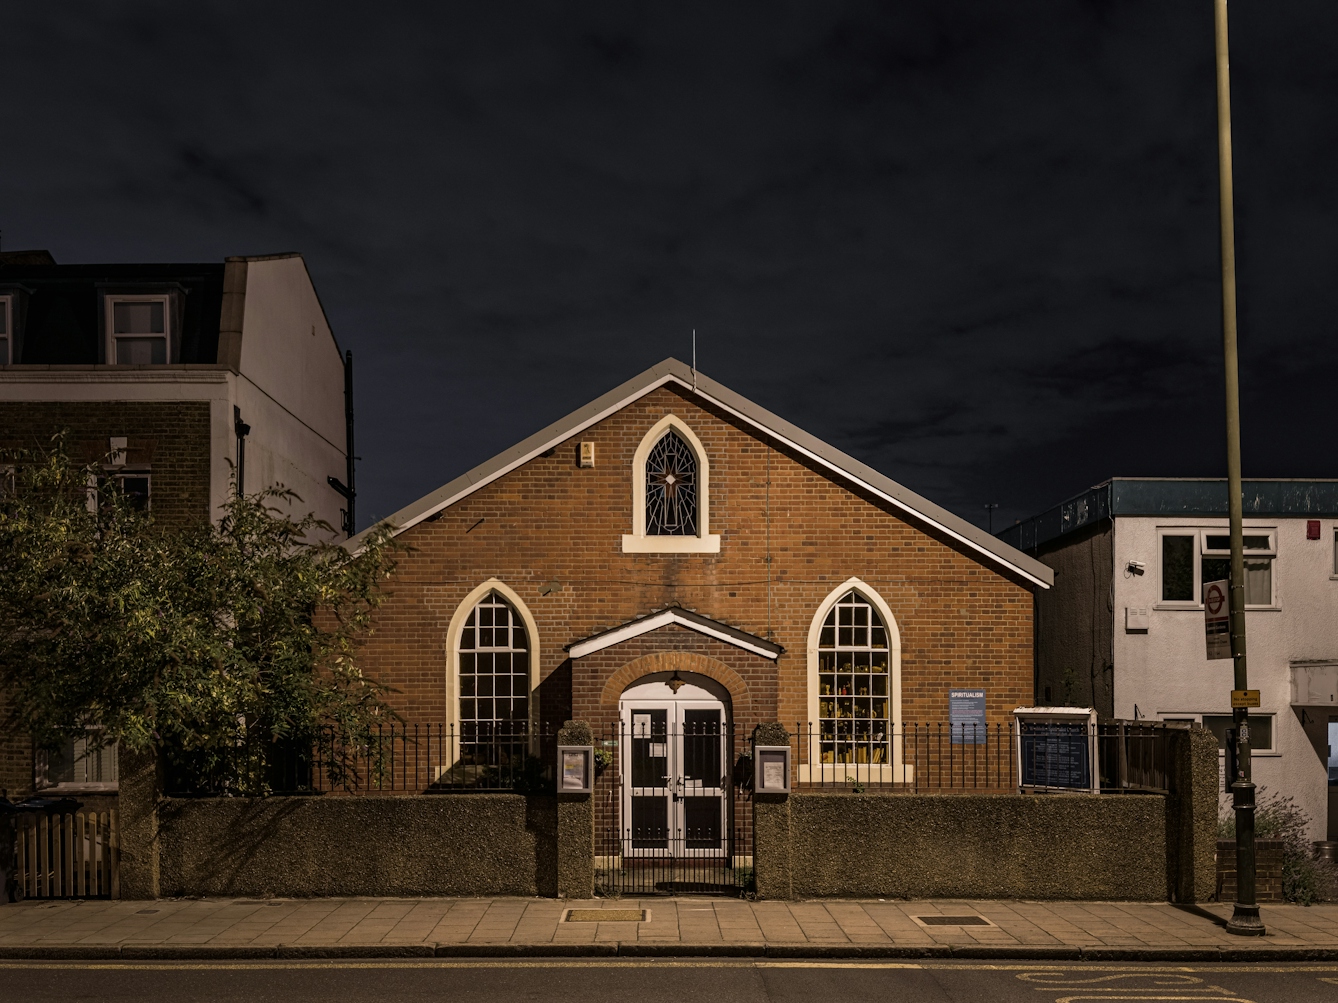 Photograph of Wimbledon Spiritualist Church at night.  The red brick Victorian building has white window recesses and a glass stained window bearing a cross in the apex of the facade.  The building is detached in a residential setting.